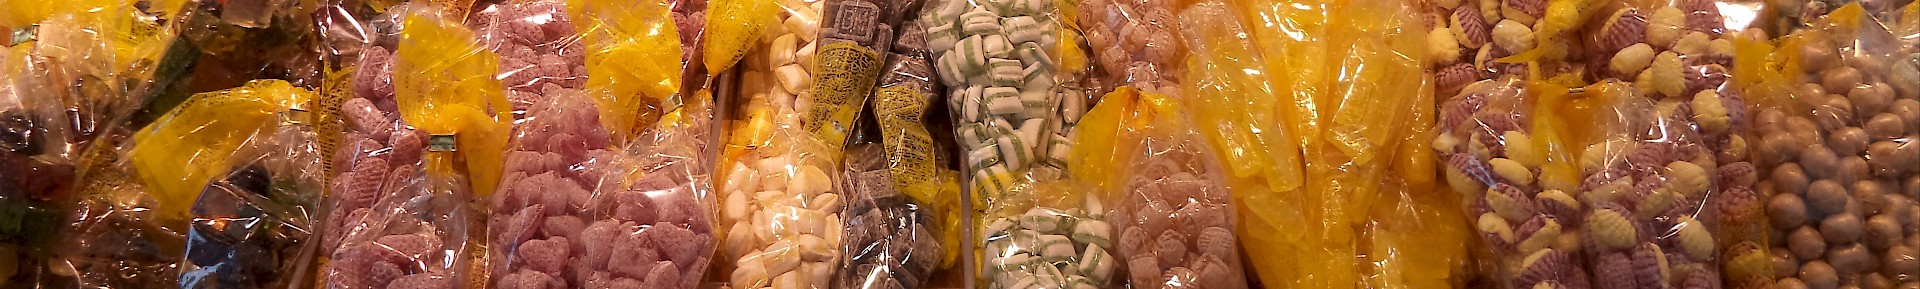 Buy self-made candy on the Christmas market